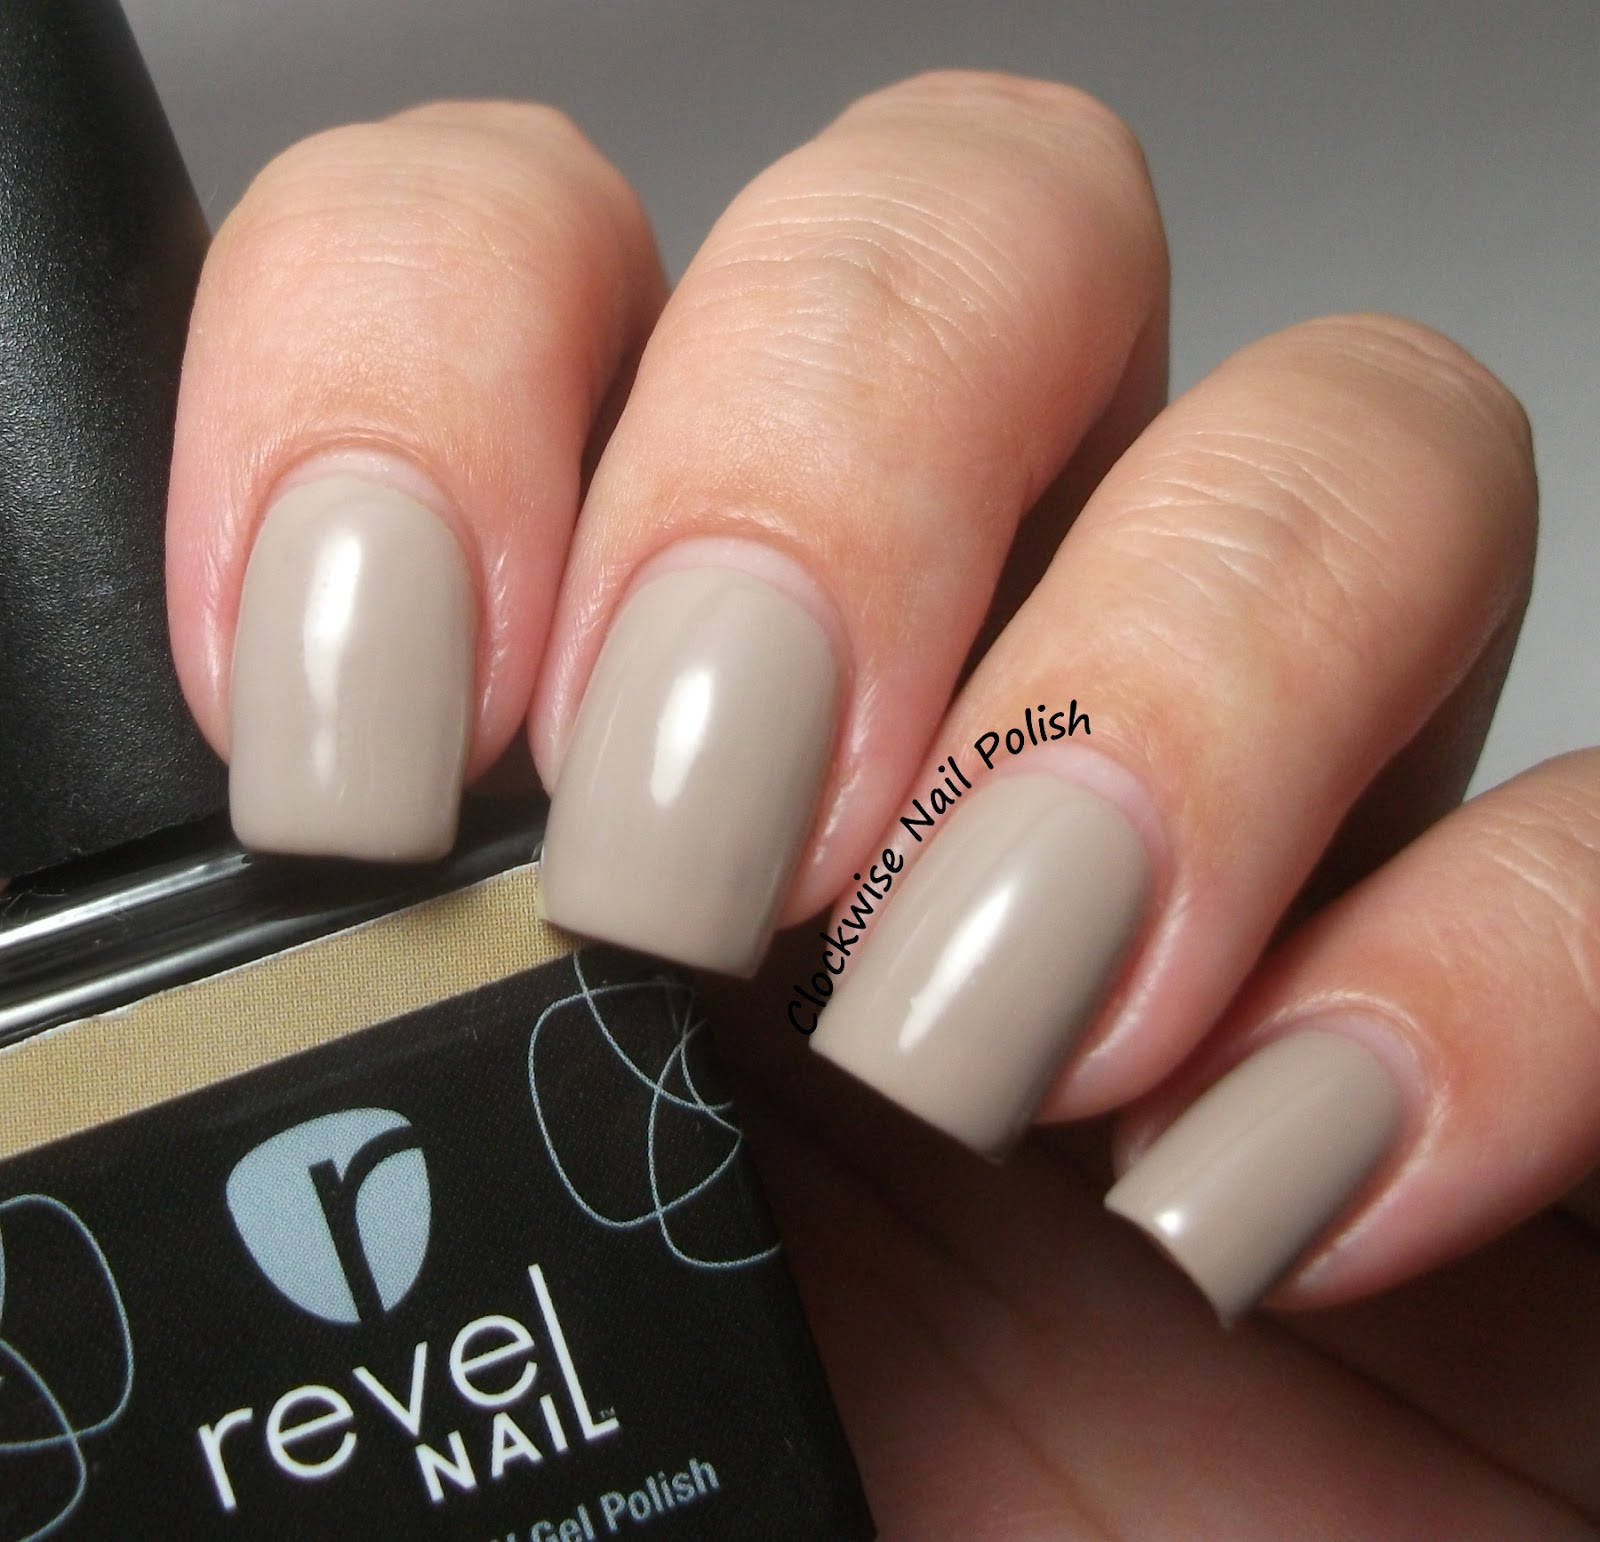 22 Best Revel Nail Colors - Home, Family, Style and Art Ideas